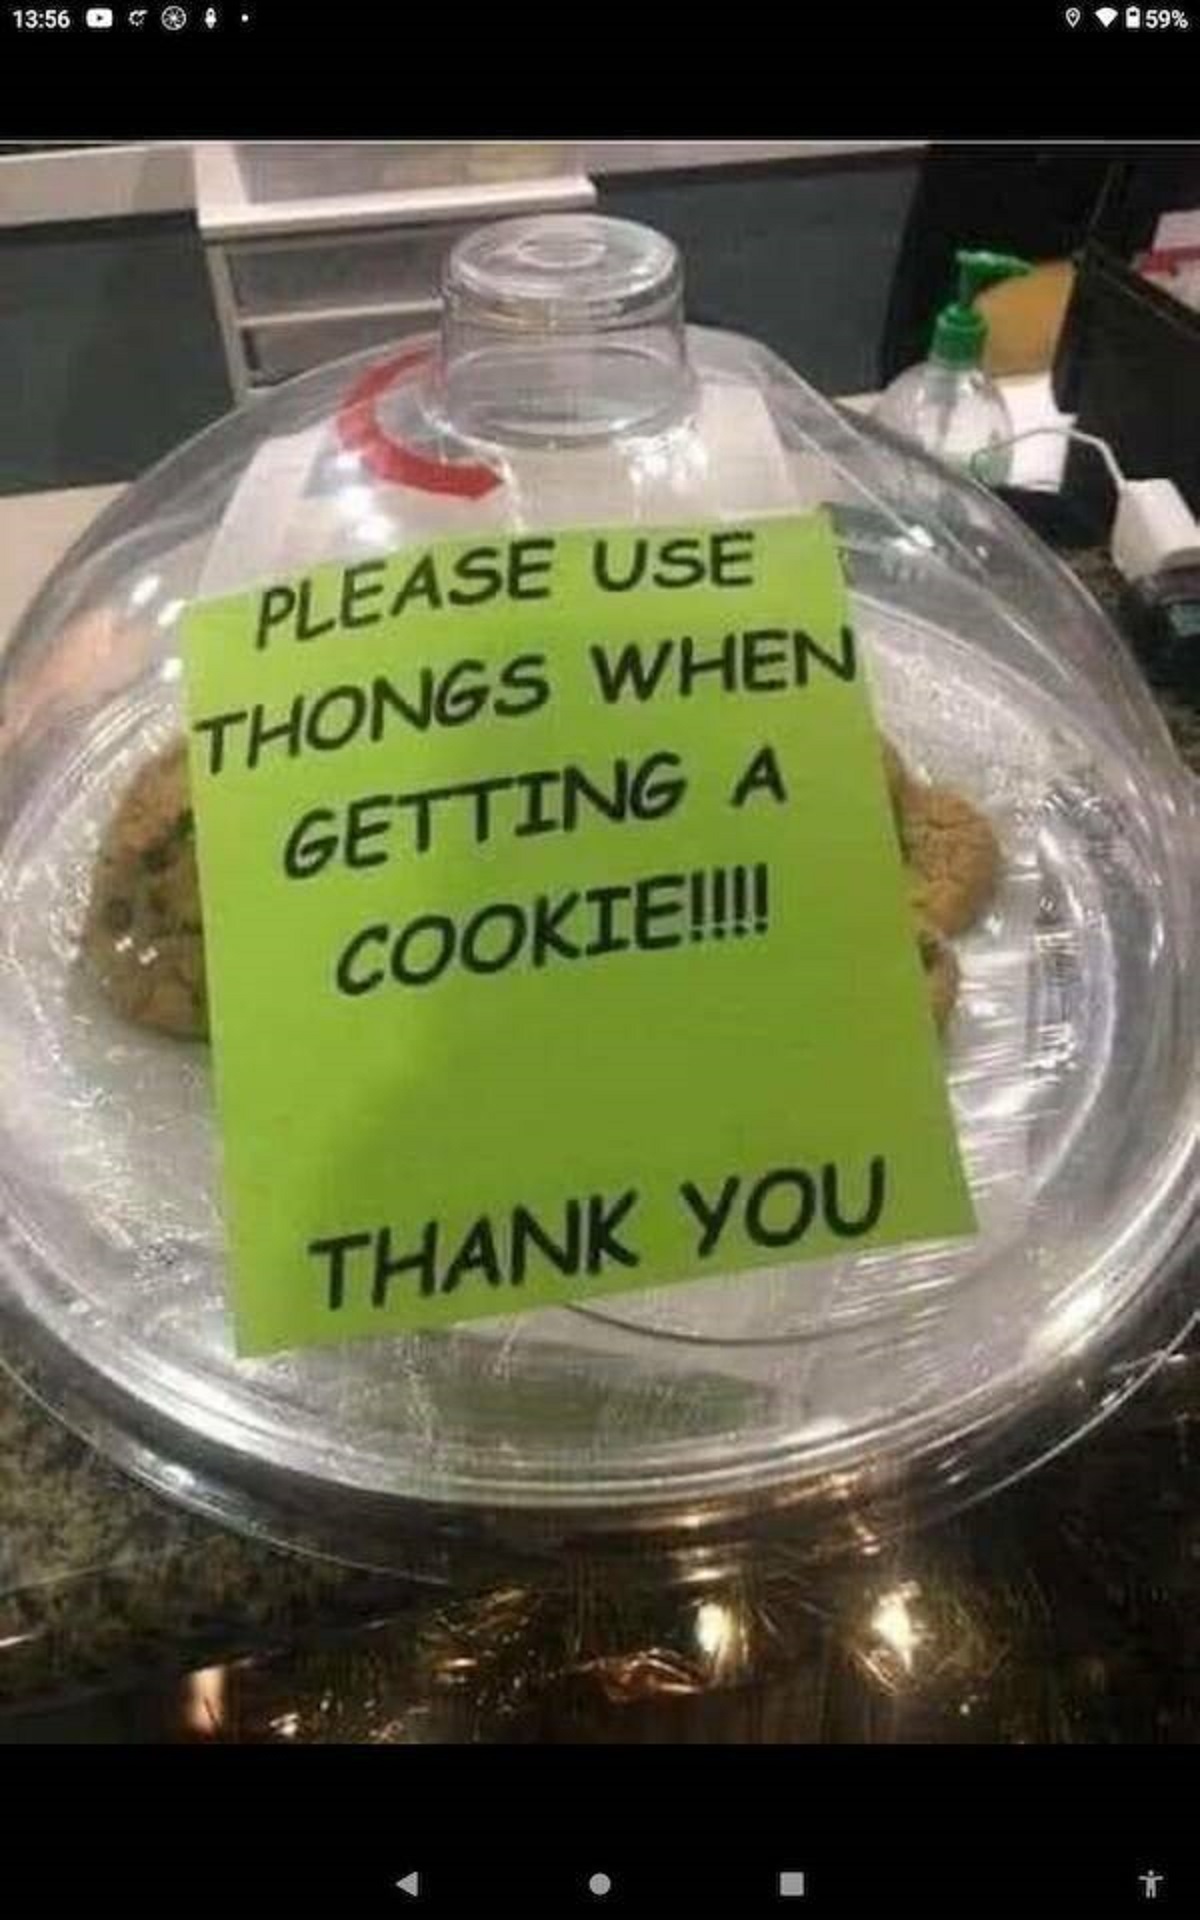 plastic bottle - Please Use Thongs When Getting A Cookie!!!! Thank You 59%